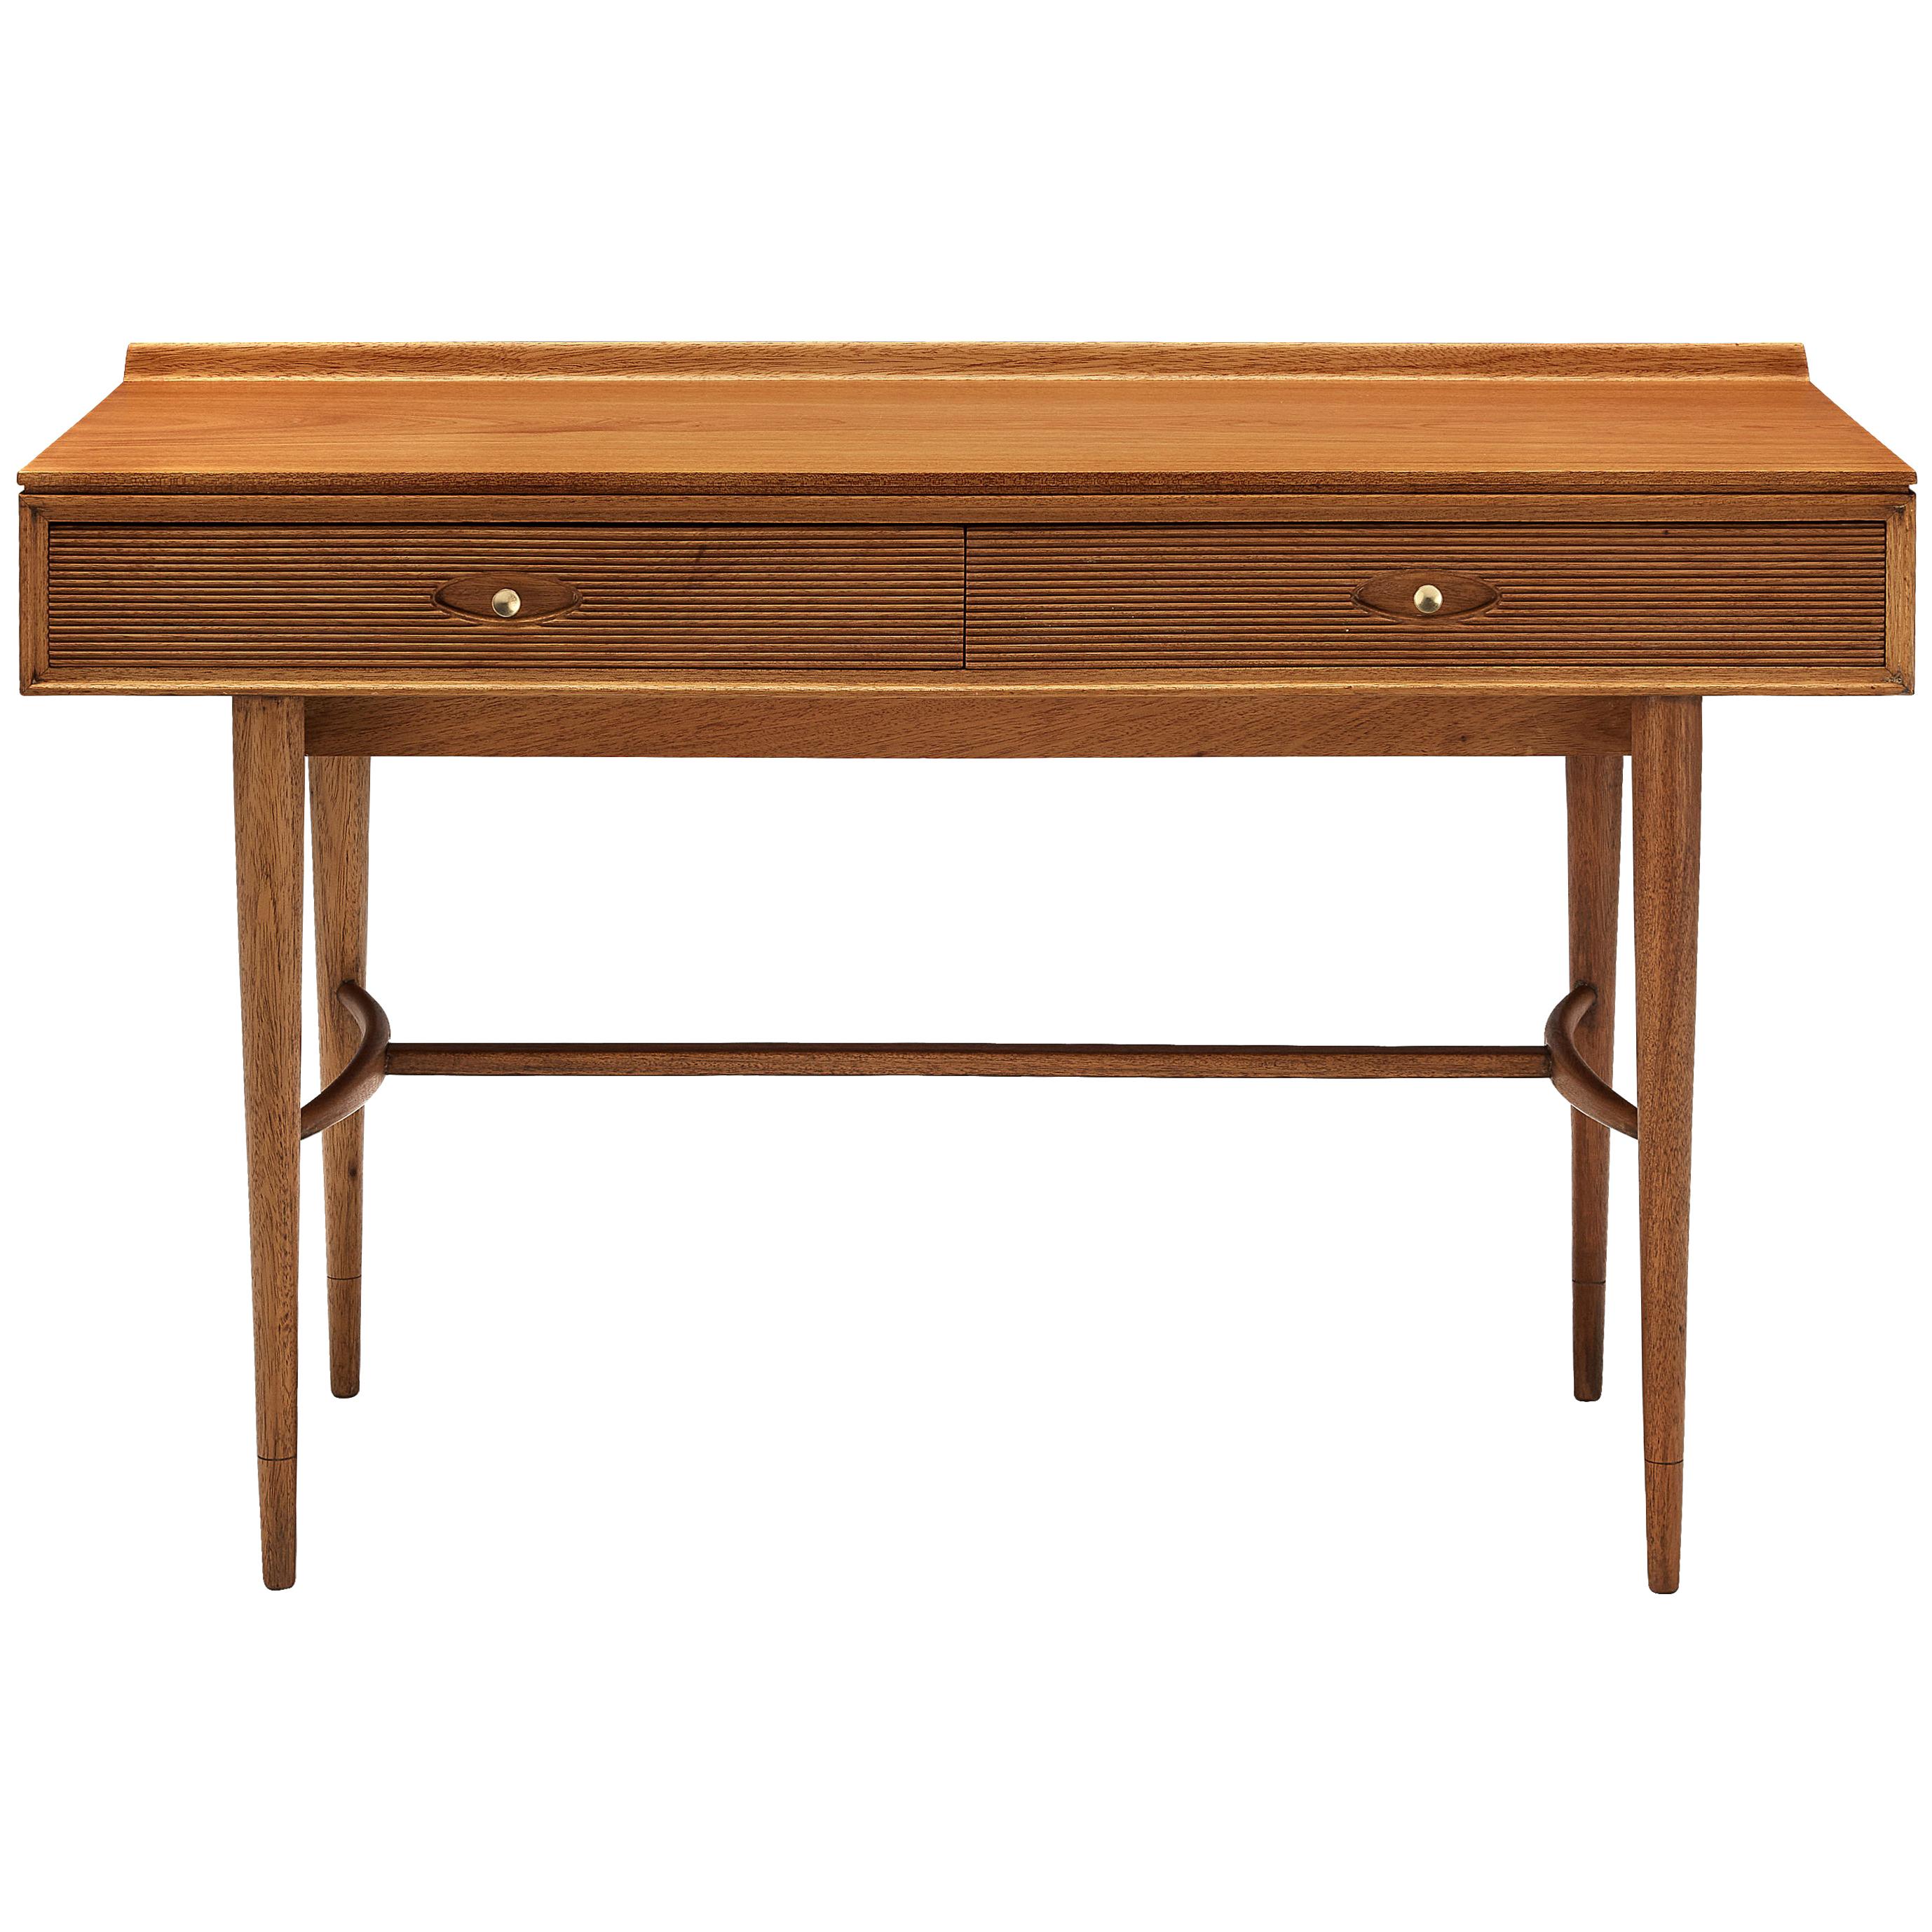 Robert Heritage Desk with Drawers in Satinwood and Brass